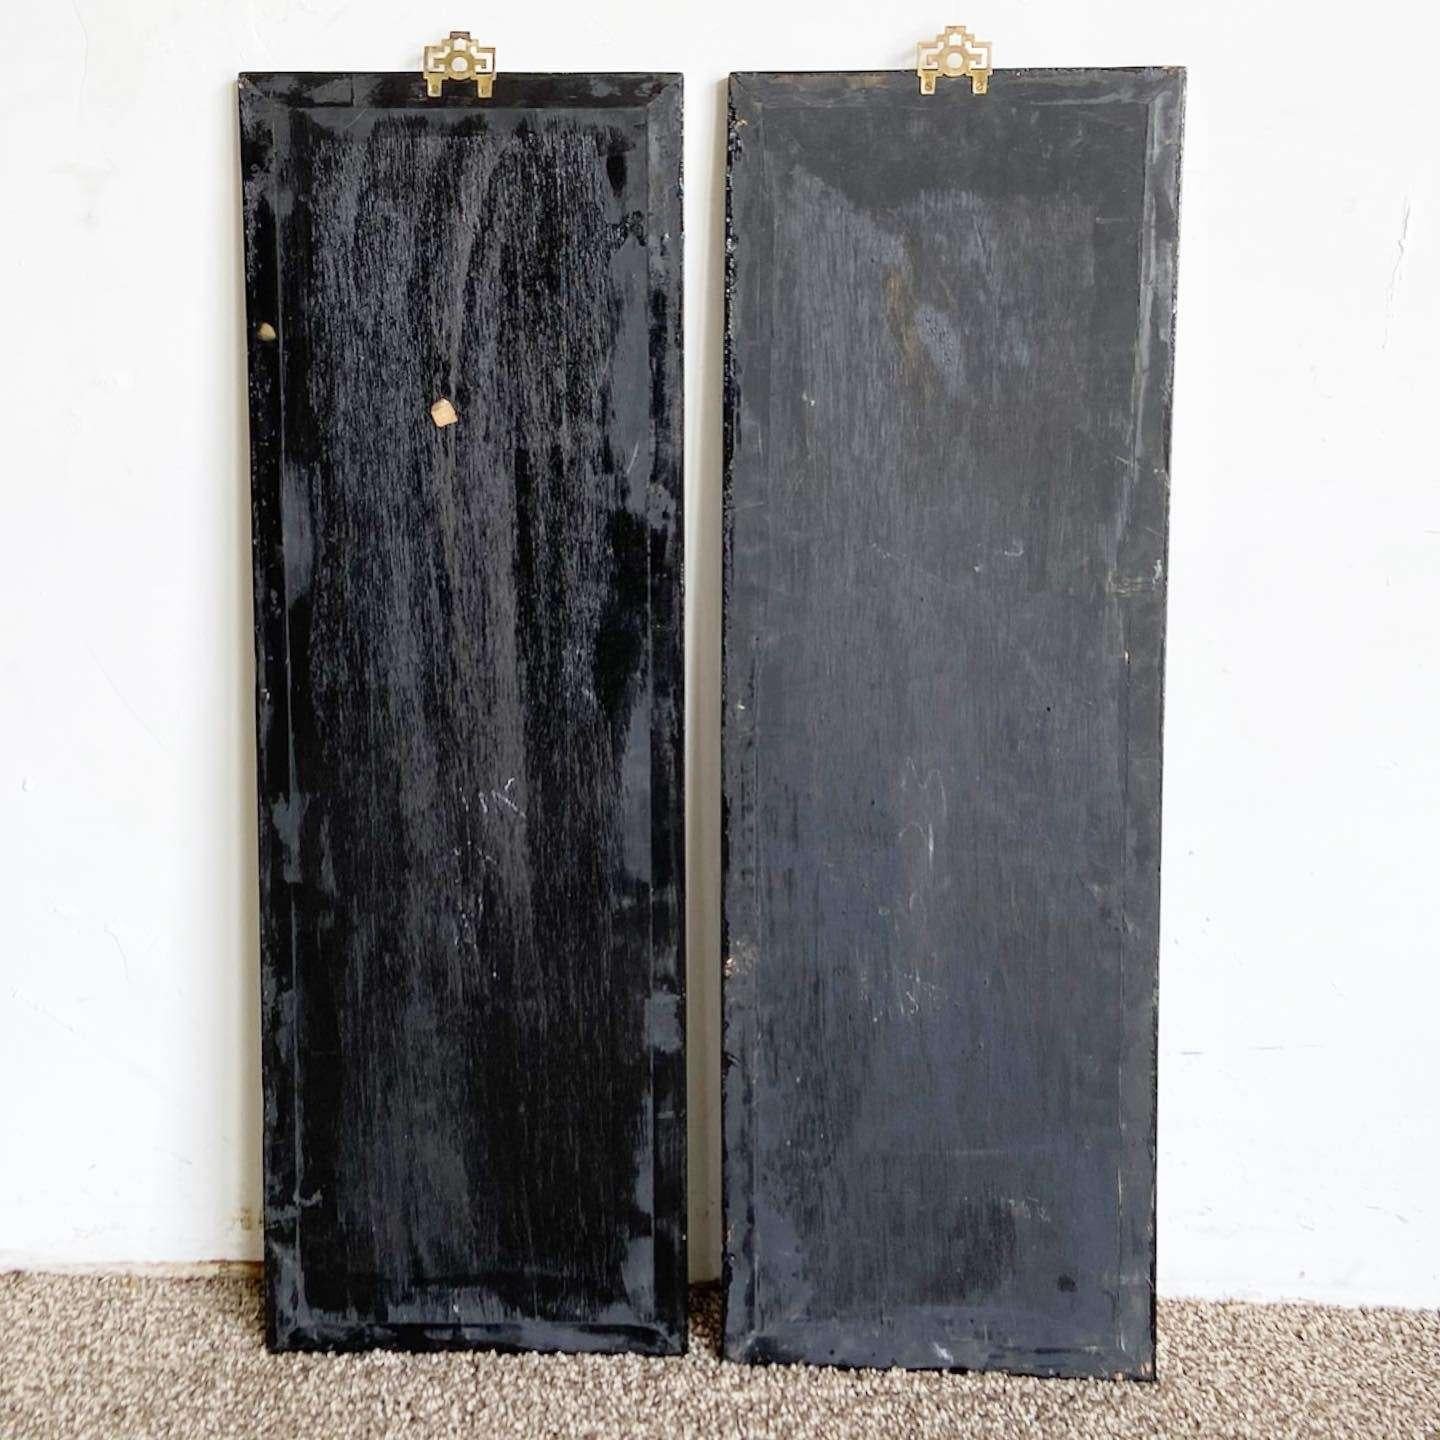 Chinese Black Lacquered, Hand Painted & Adhered Figure Wall Accessories - a Pair For Sale 3